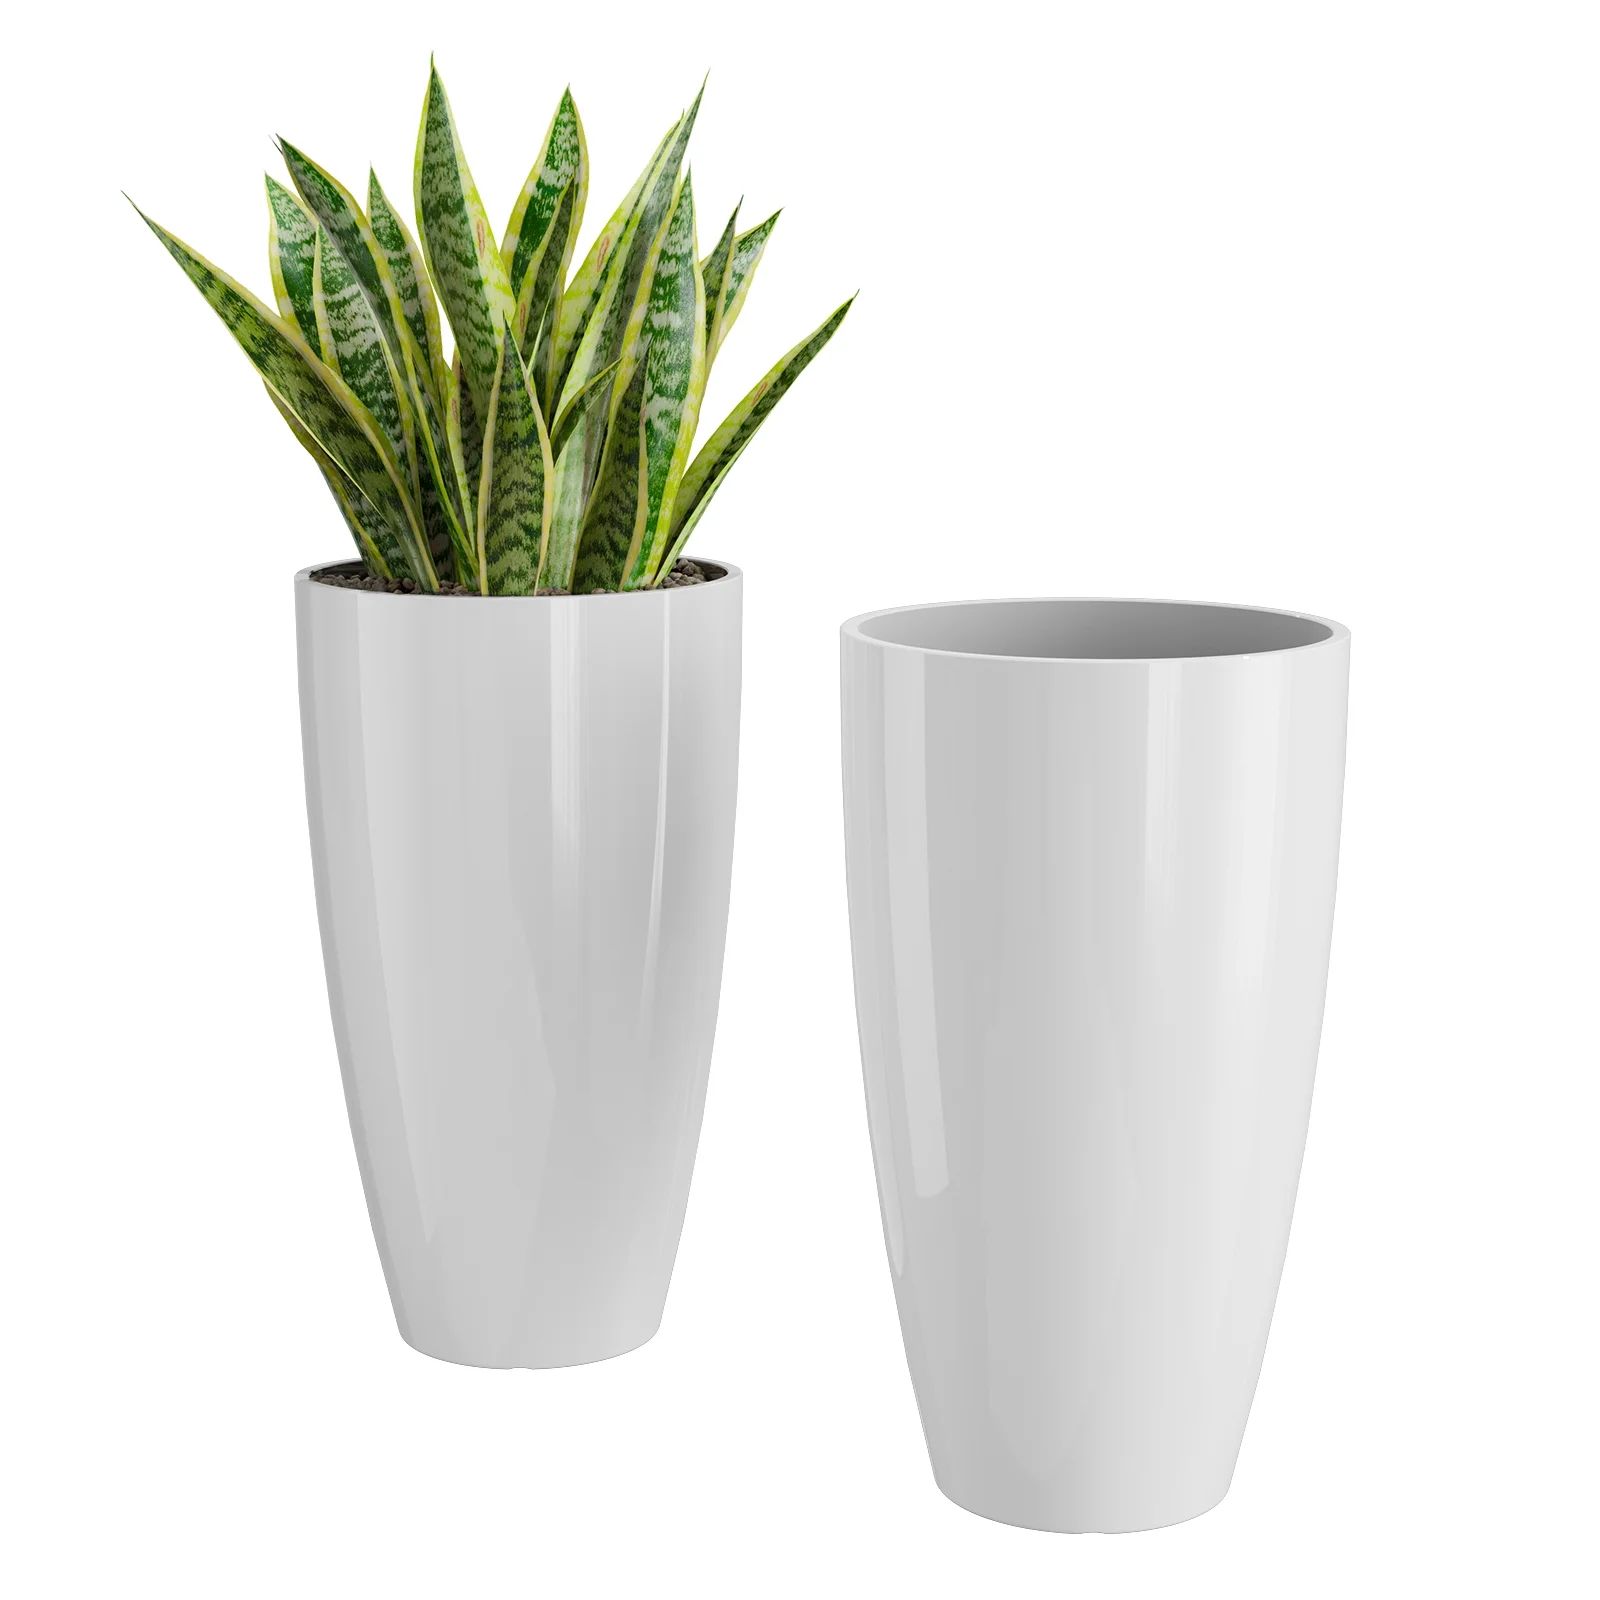 QCQHDU 21 inch Tall Planters for Outdoor Plants Set of 2,Outdoor Planters for Front Porch,Large P... | Walmart (US)